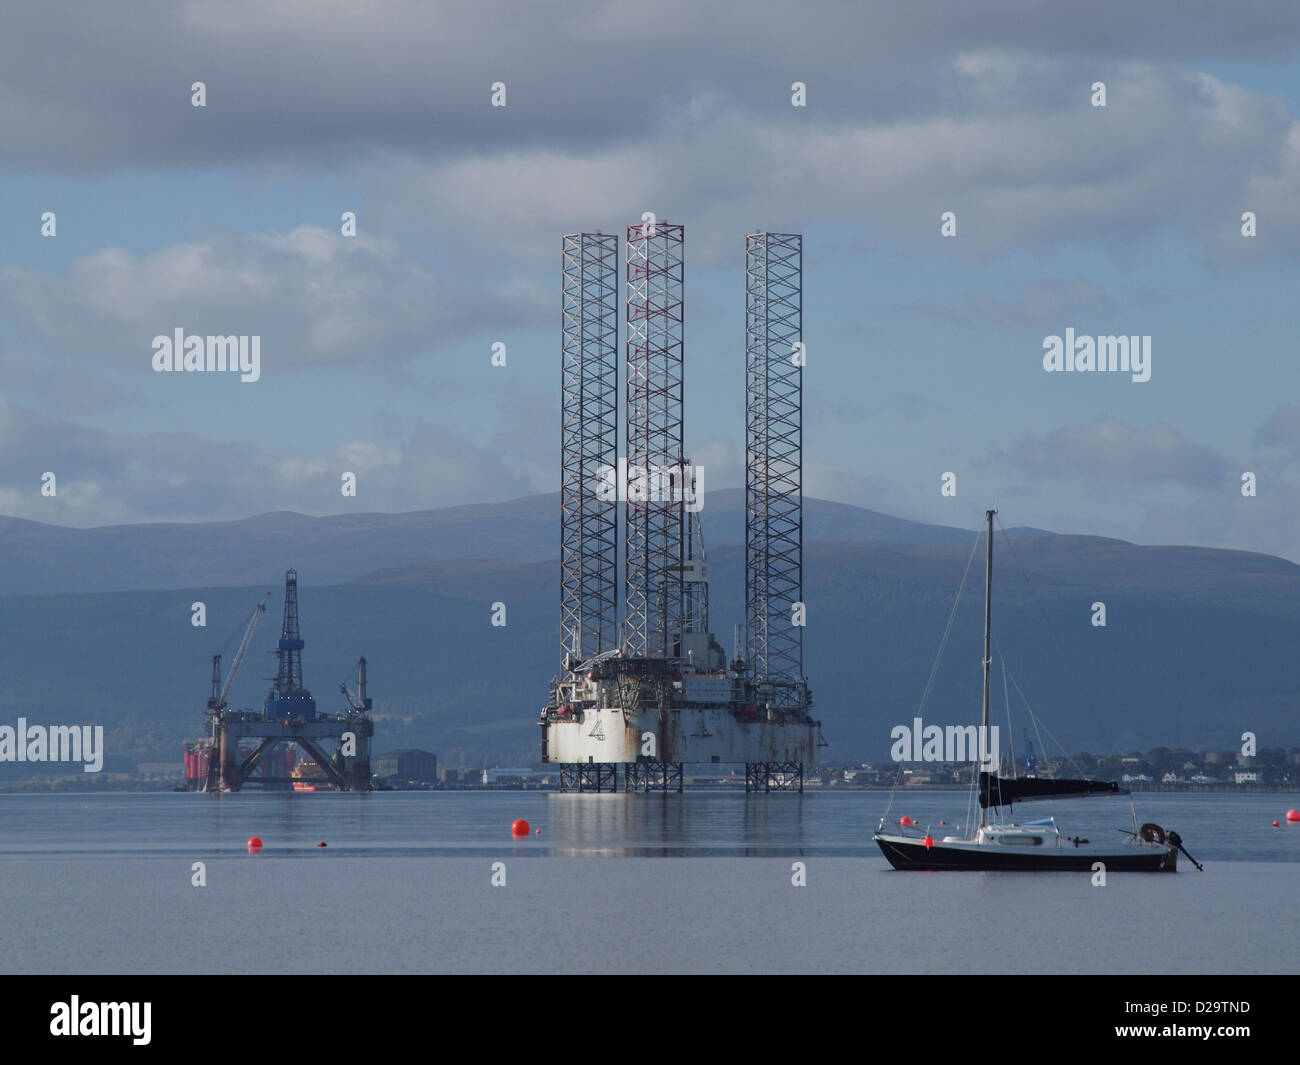 Oil rigs and a yacht  in the Cromarty Firth, Scotland Stock Photo